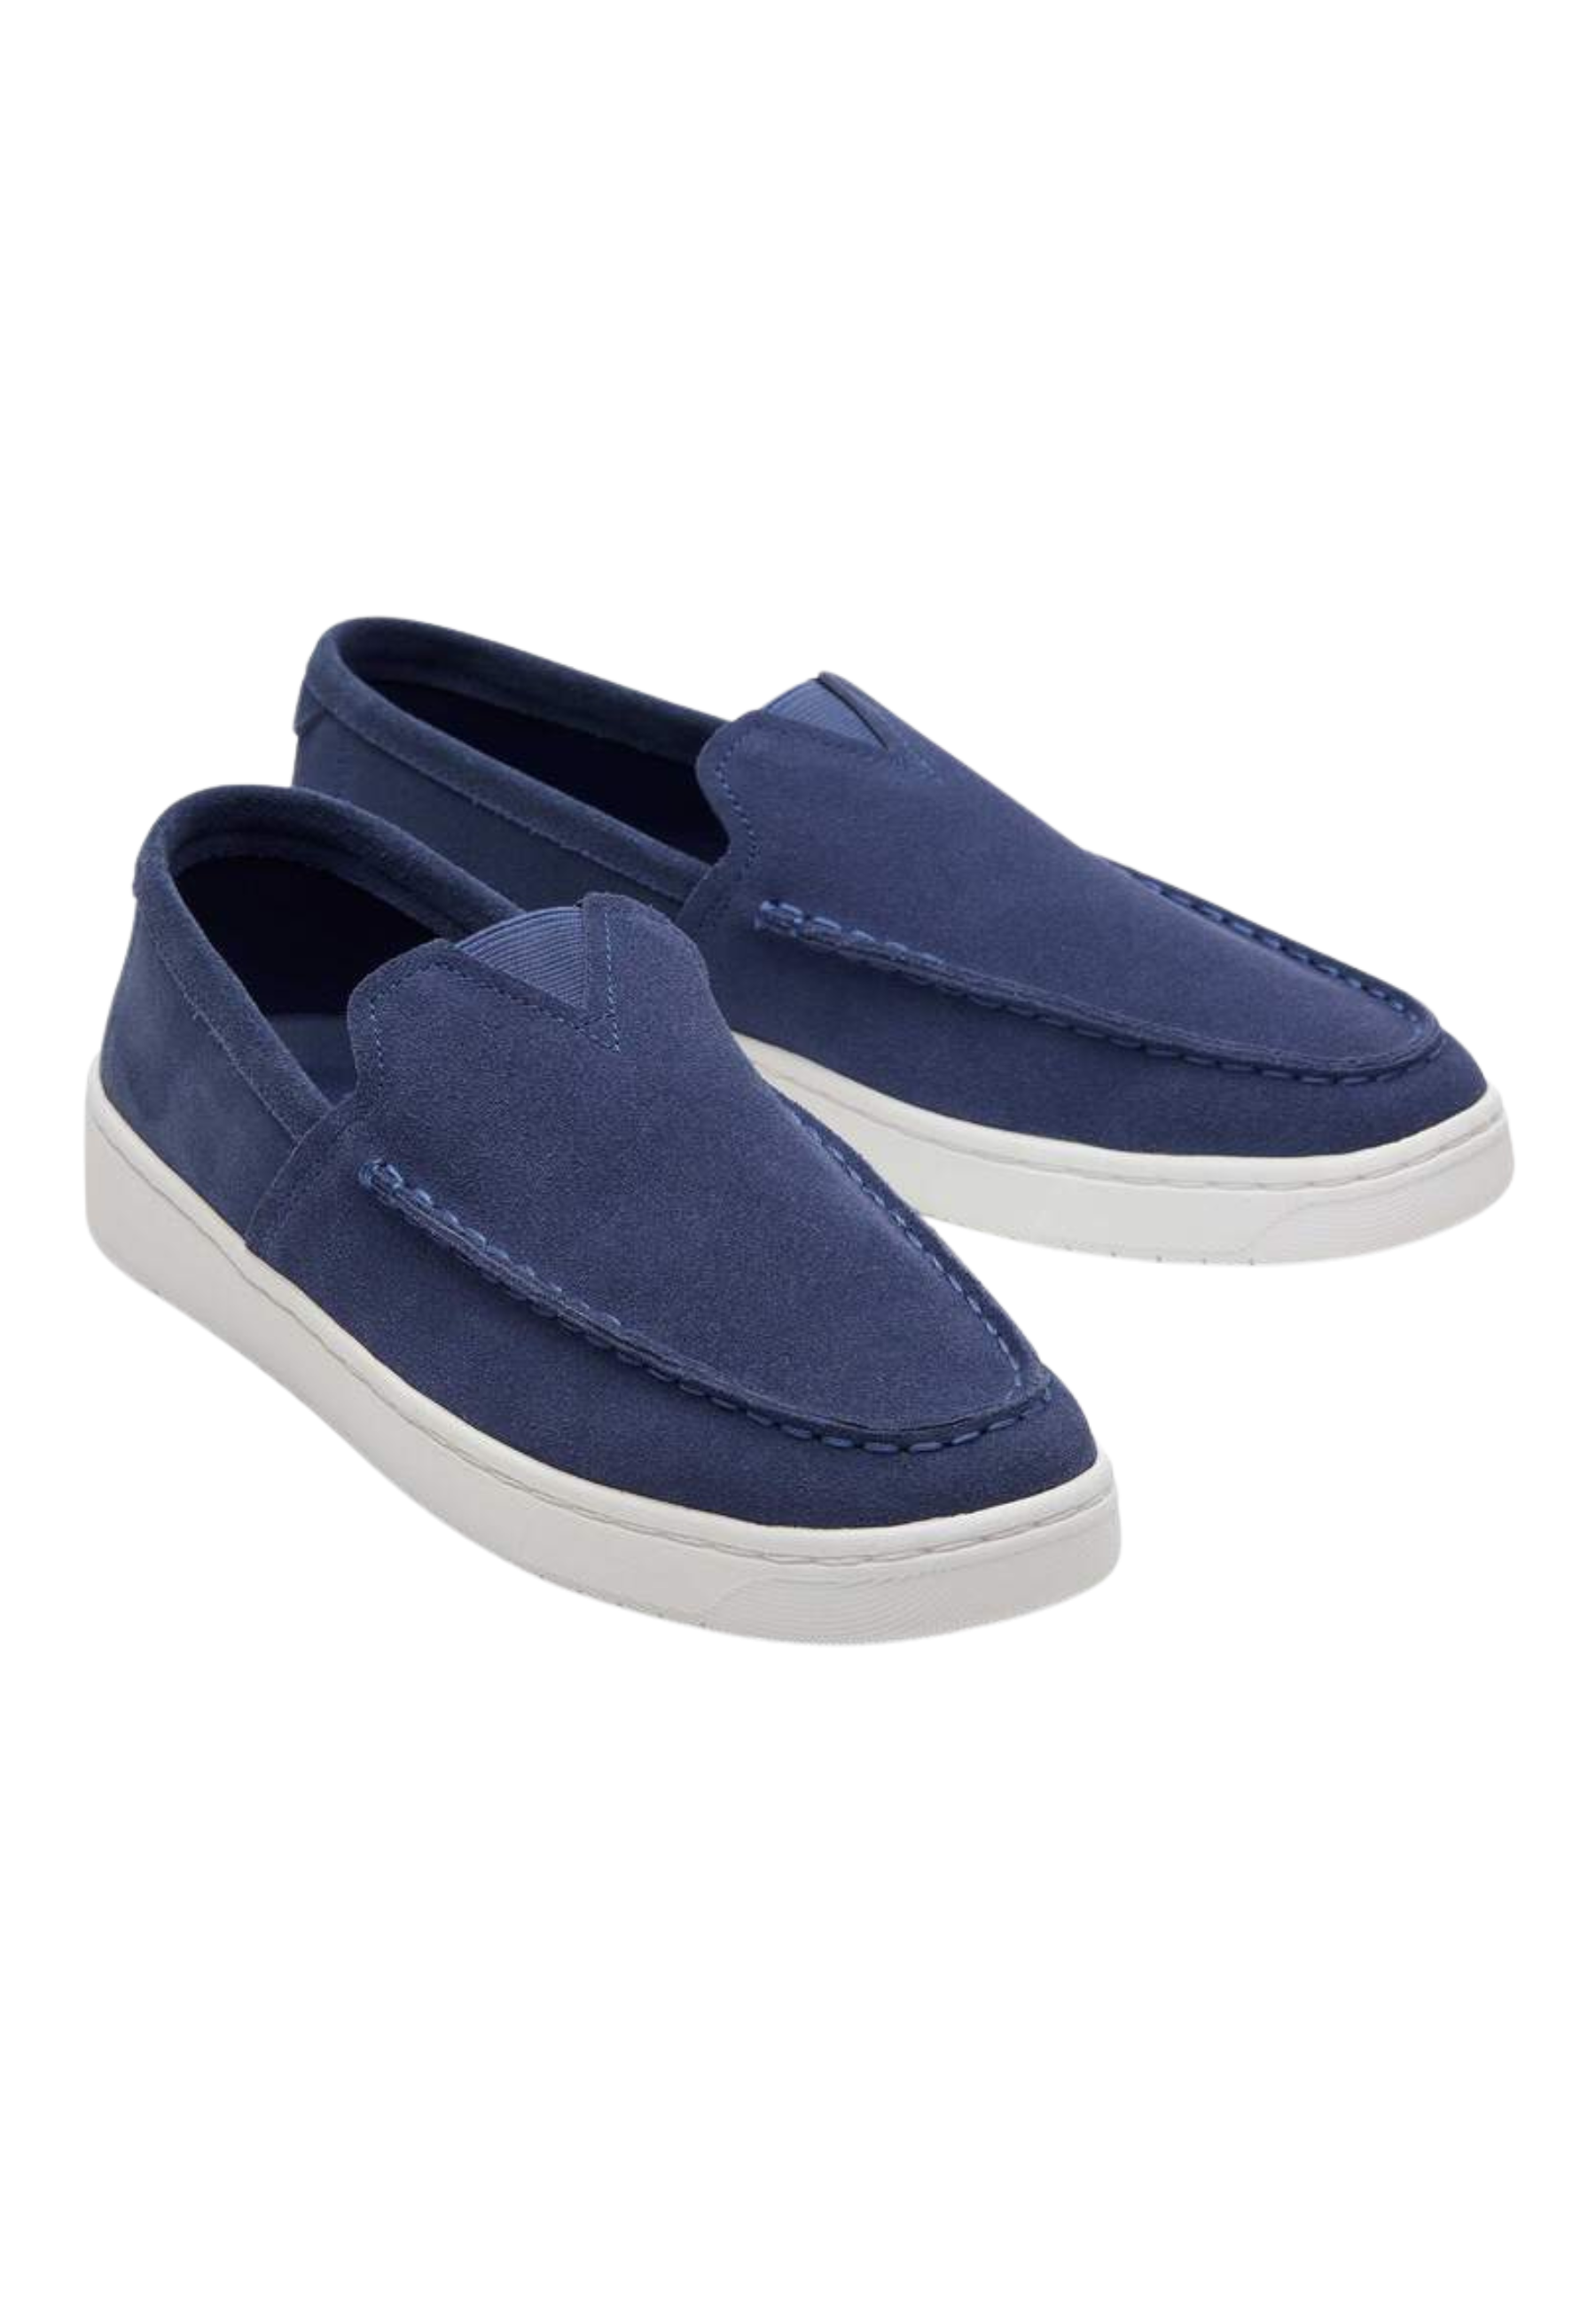 Trvl lite loafer loafers donkerblauw